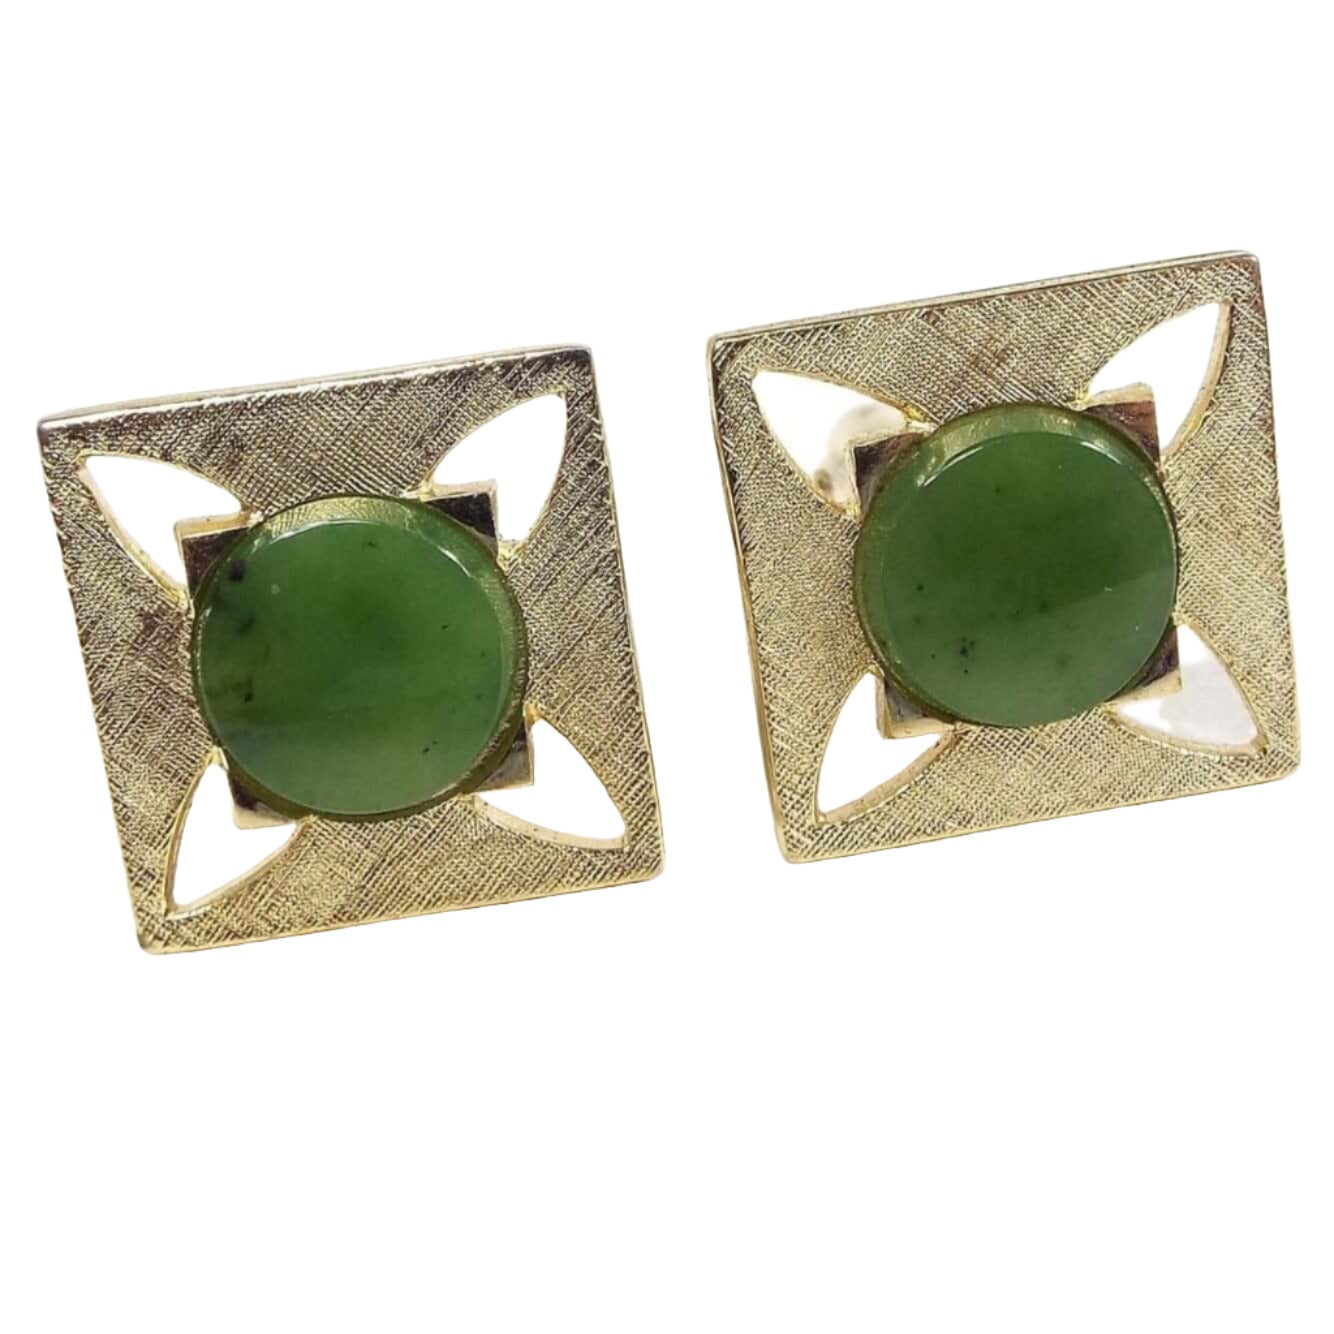 Front view of the Mid Century vintage cufflinks. The cufflinks are square in shape with matte brushed gold tone color metal. The middle cabs are flat round green jade gemstone on top of flat squares. The outer edge has a square design with cut out tapered shapes to the corners of the cufflinks for a nice modernist style design.